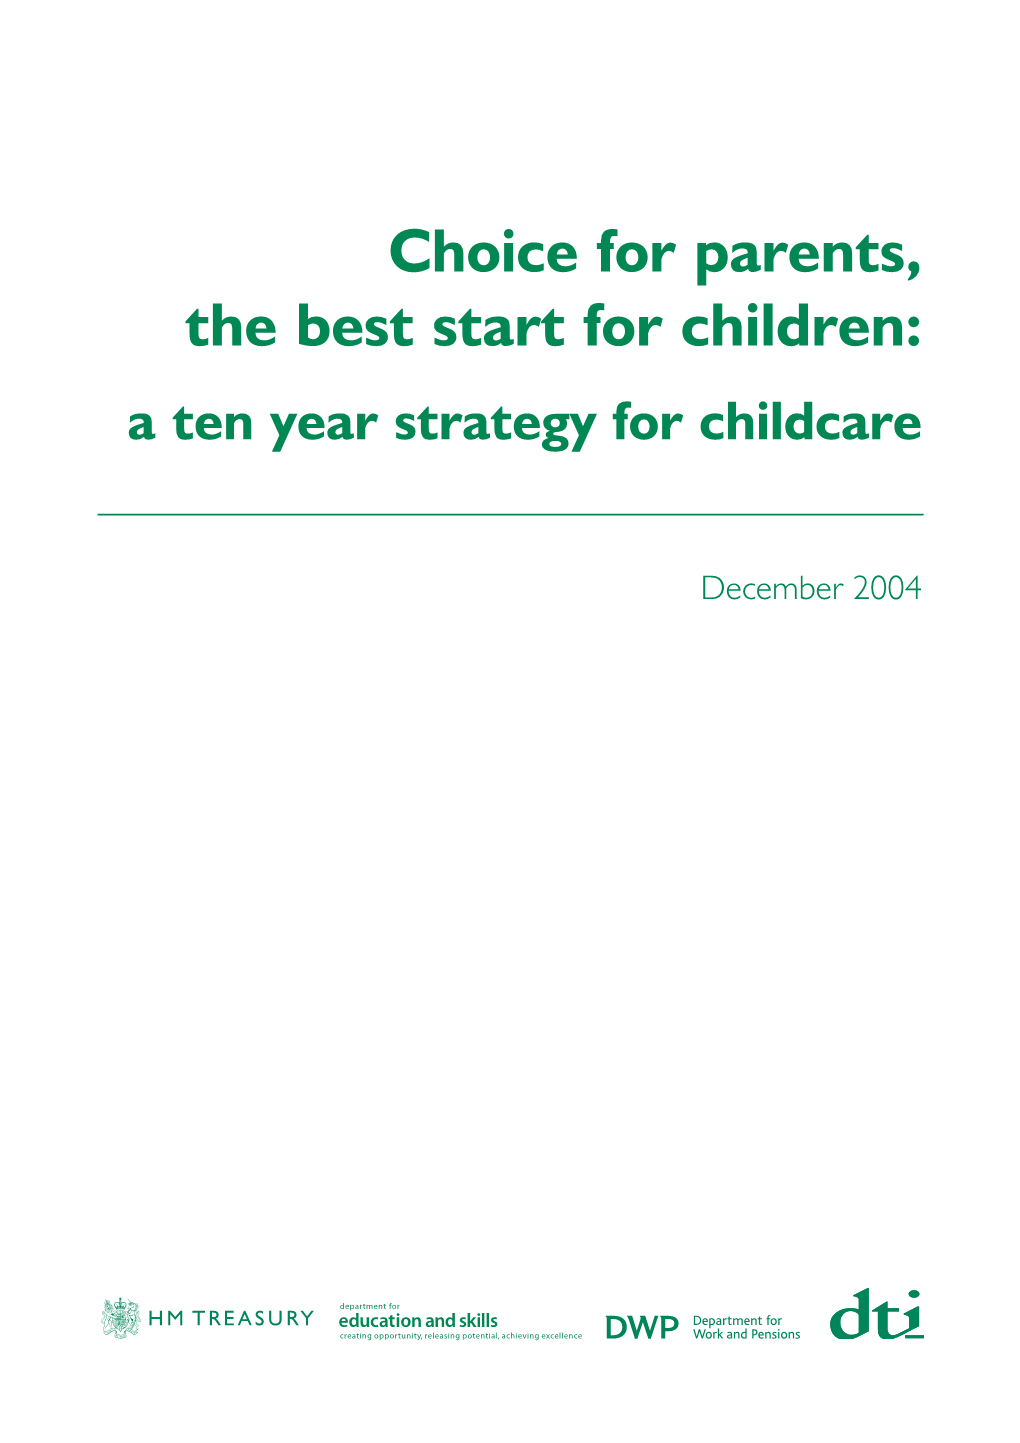 Choice for Parents, the Best Start for Children: a Ten Year Strategy for Childcare